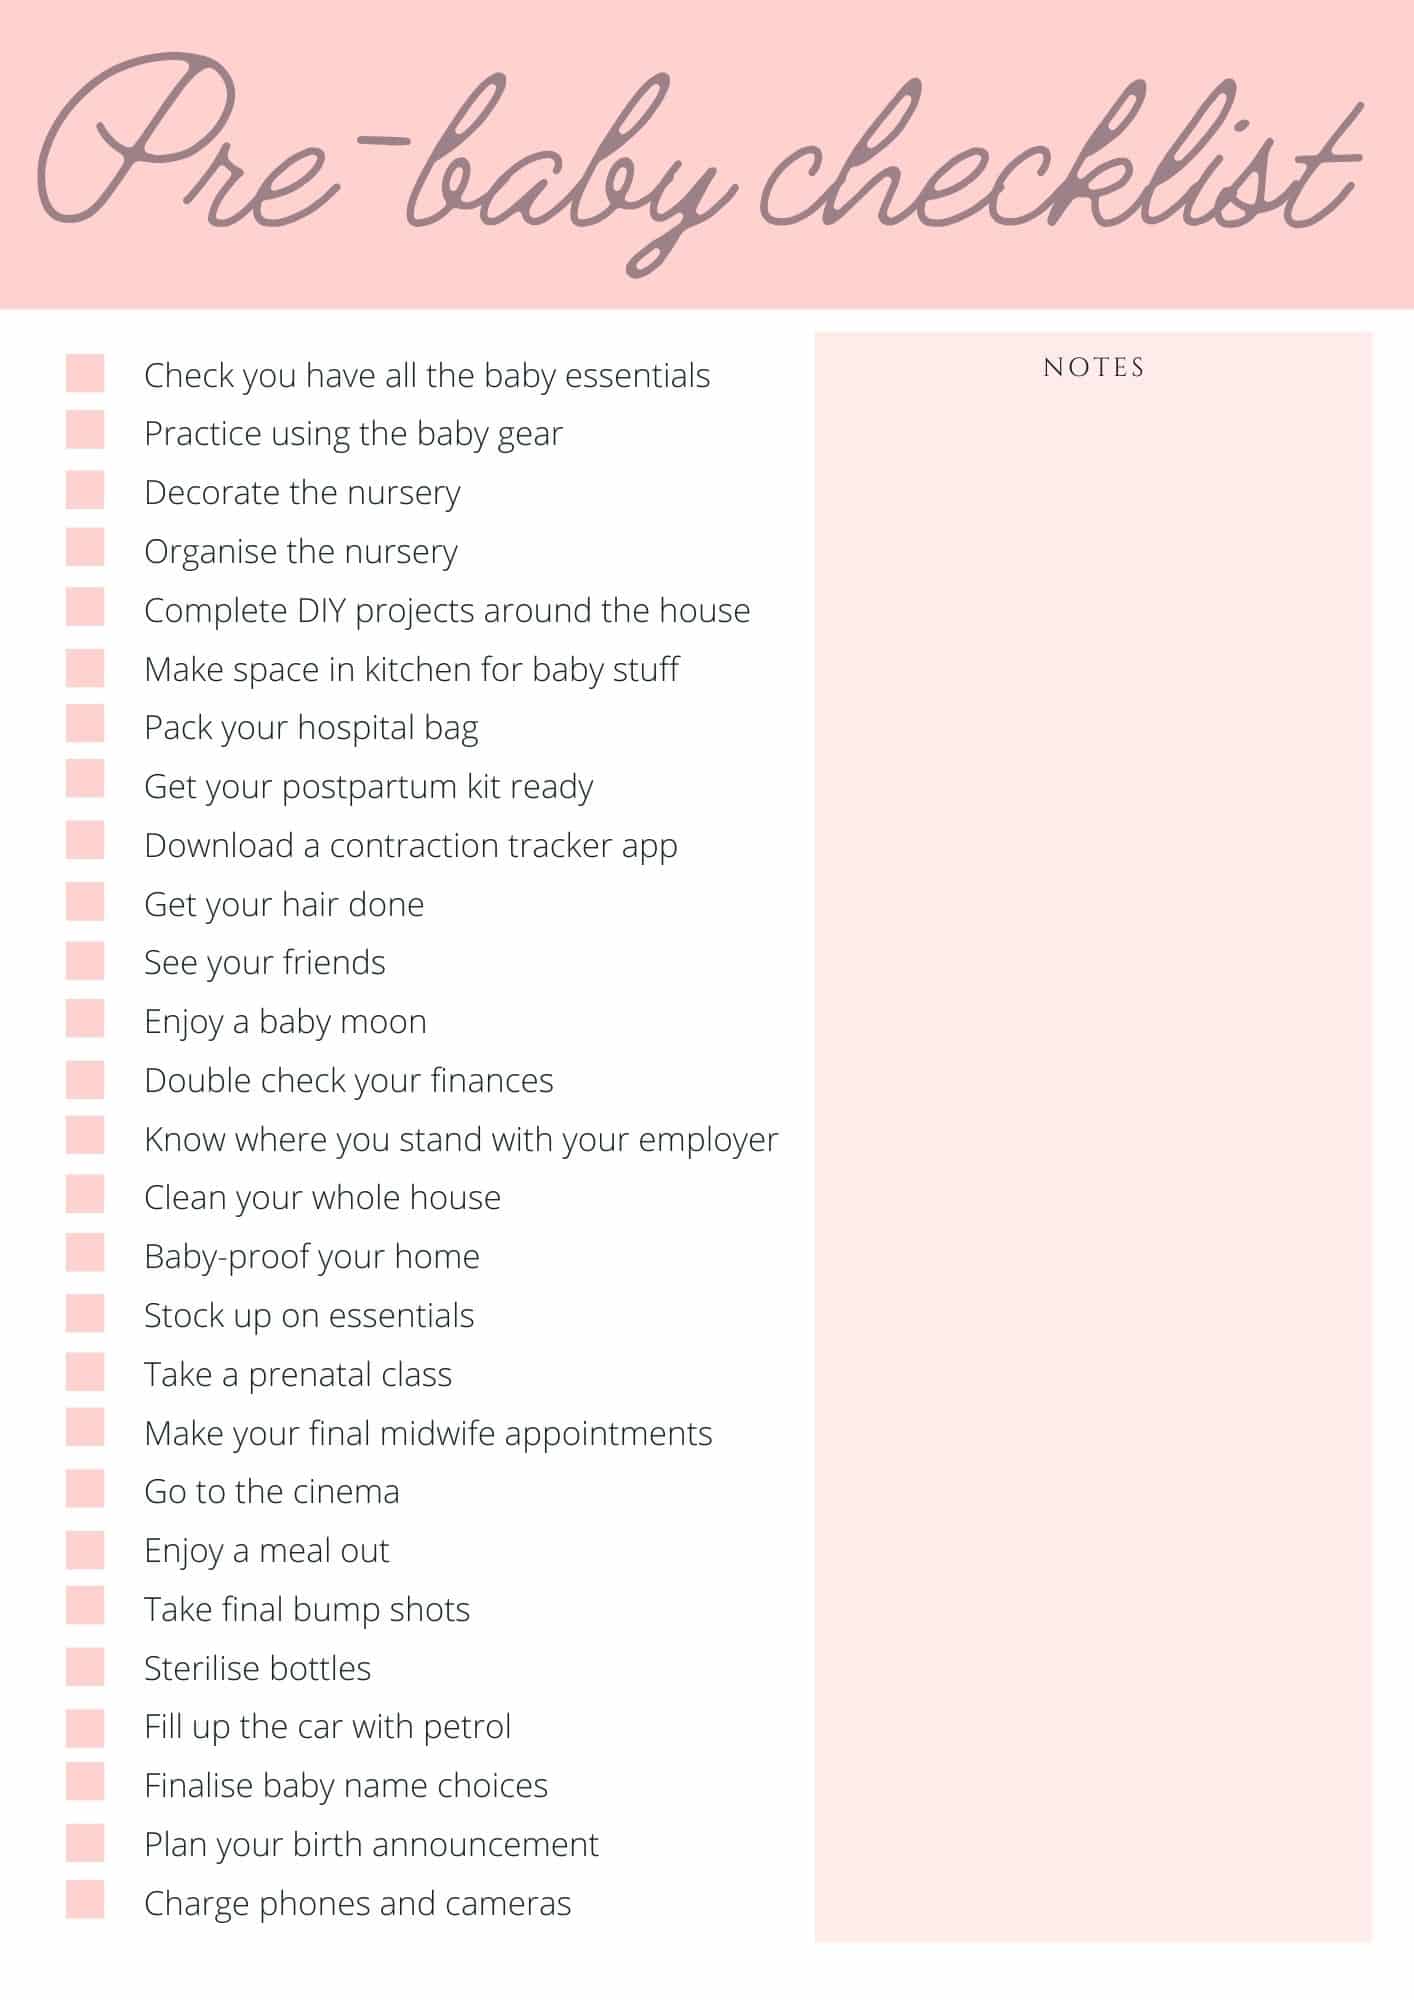 Things to do before baby is born PDF download checklist